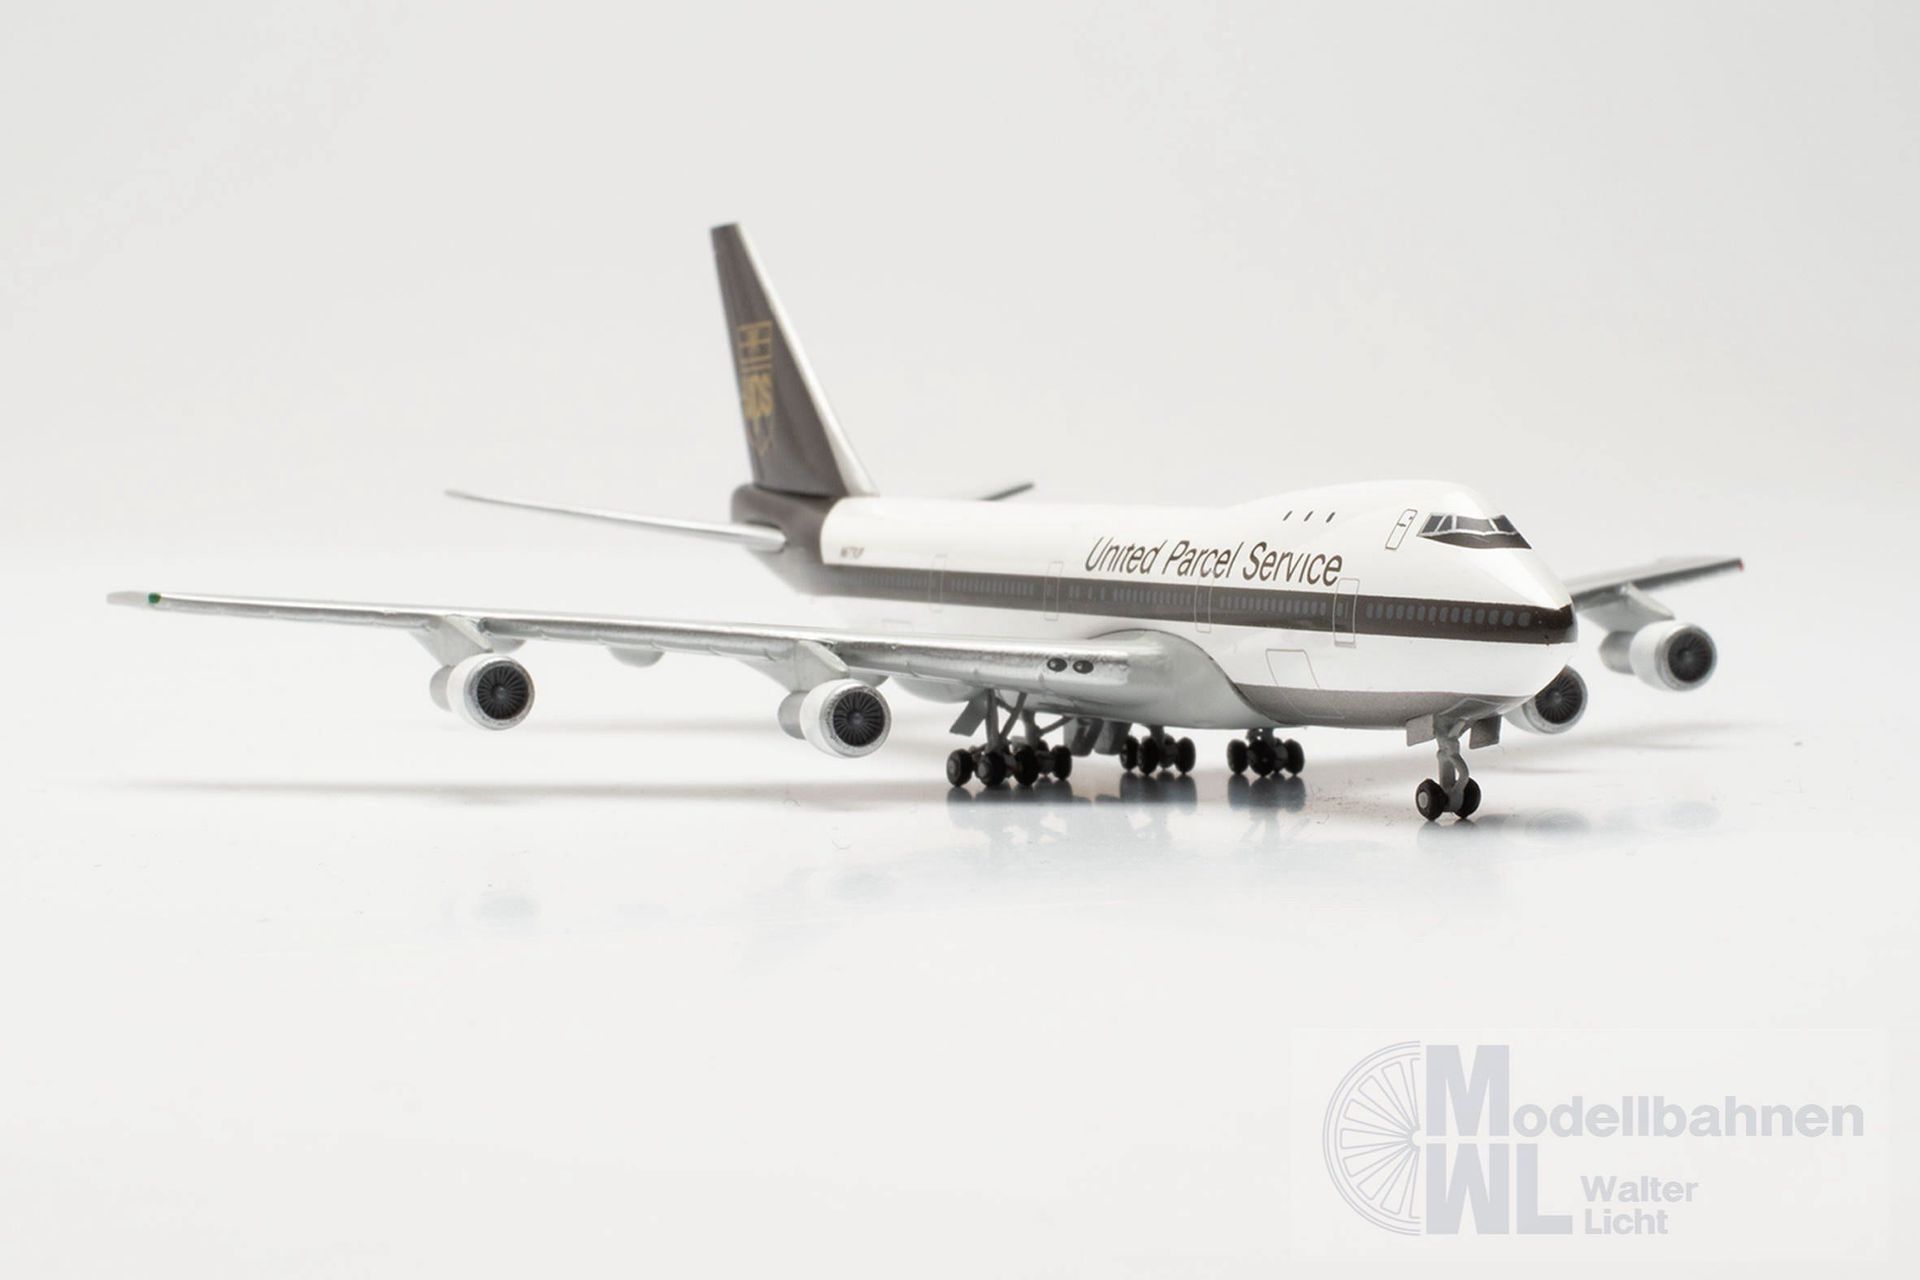 Herpa 537063 - Boeing 747-100F UPS Airlines 1:500